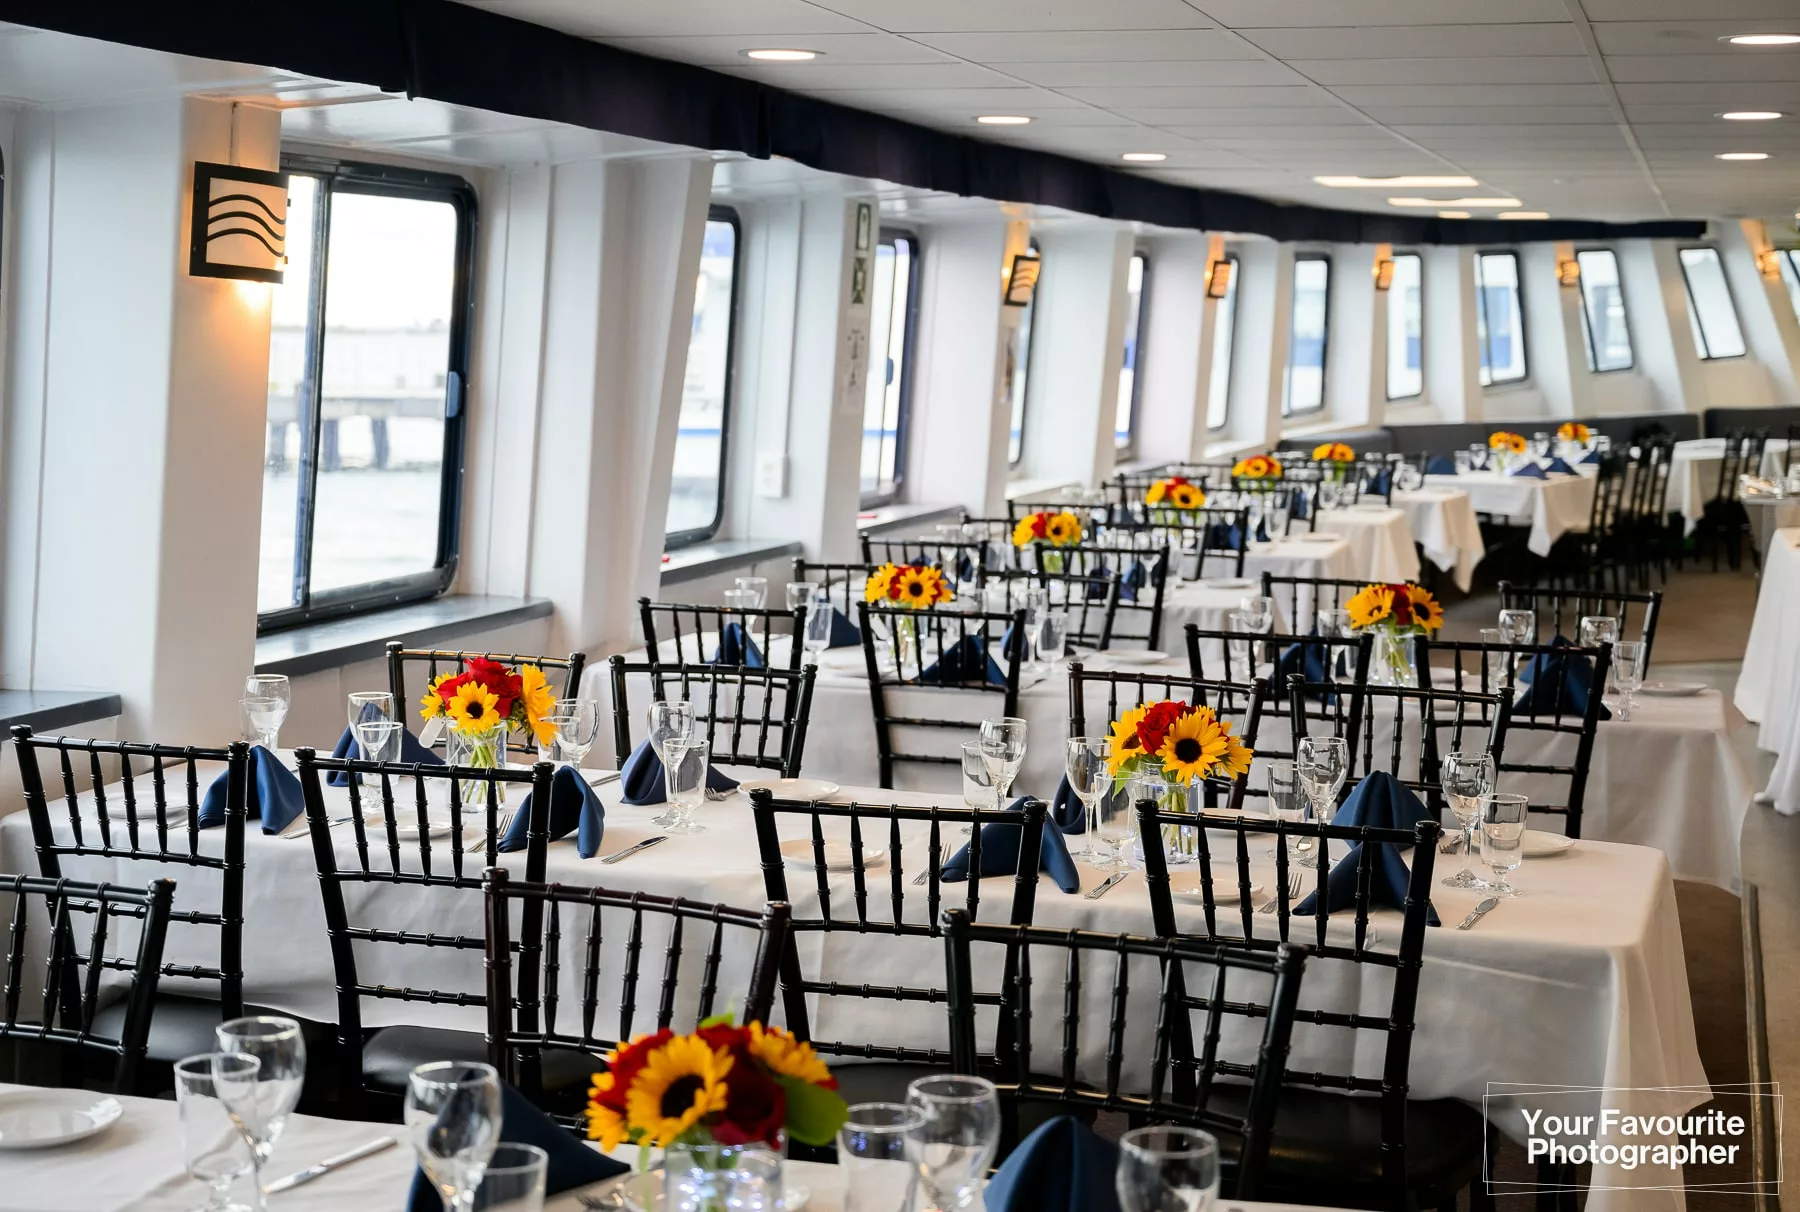 Interior of the Northern Spirit cruise ship set up with tables, chairs, and centrepieces for a wedding